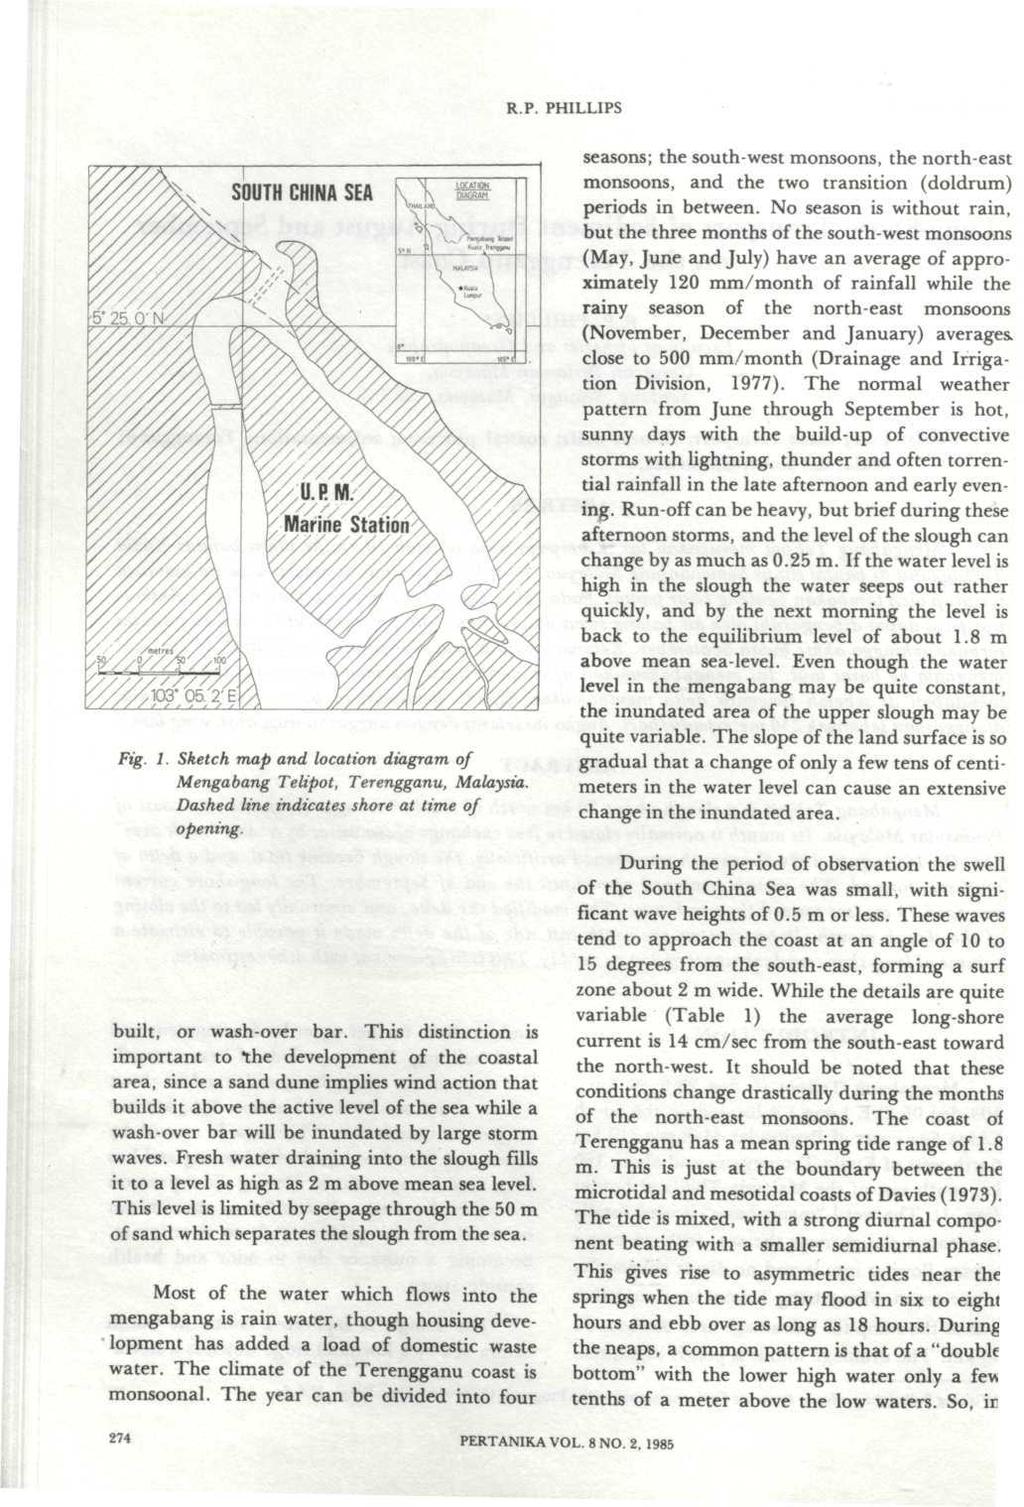 R.P. PHILLIPS V////J Fig. 1. Sketch map and location diagram of Mengabang Telipot, Terengganu, Malaysia. Dashed line indicates shore at time of opening. built, or wash-over bar.